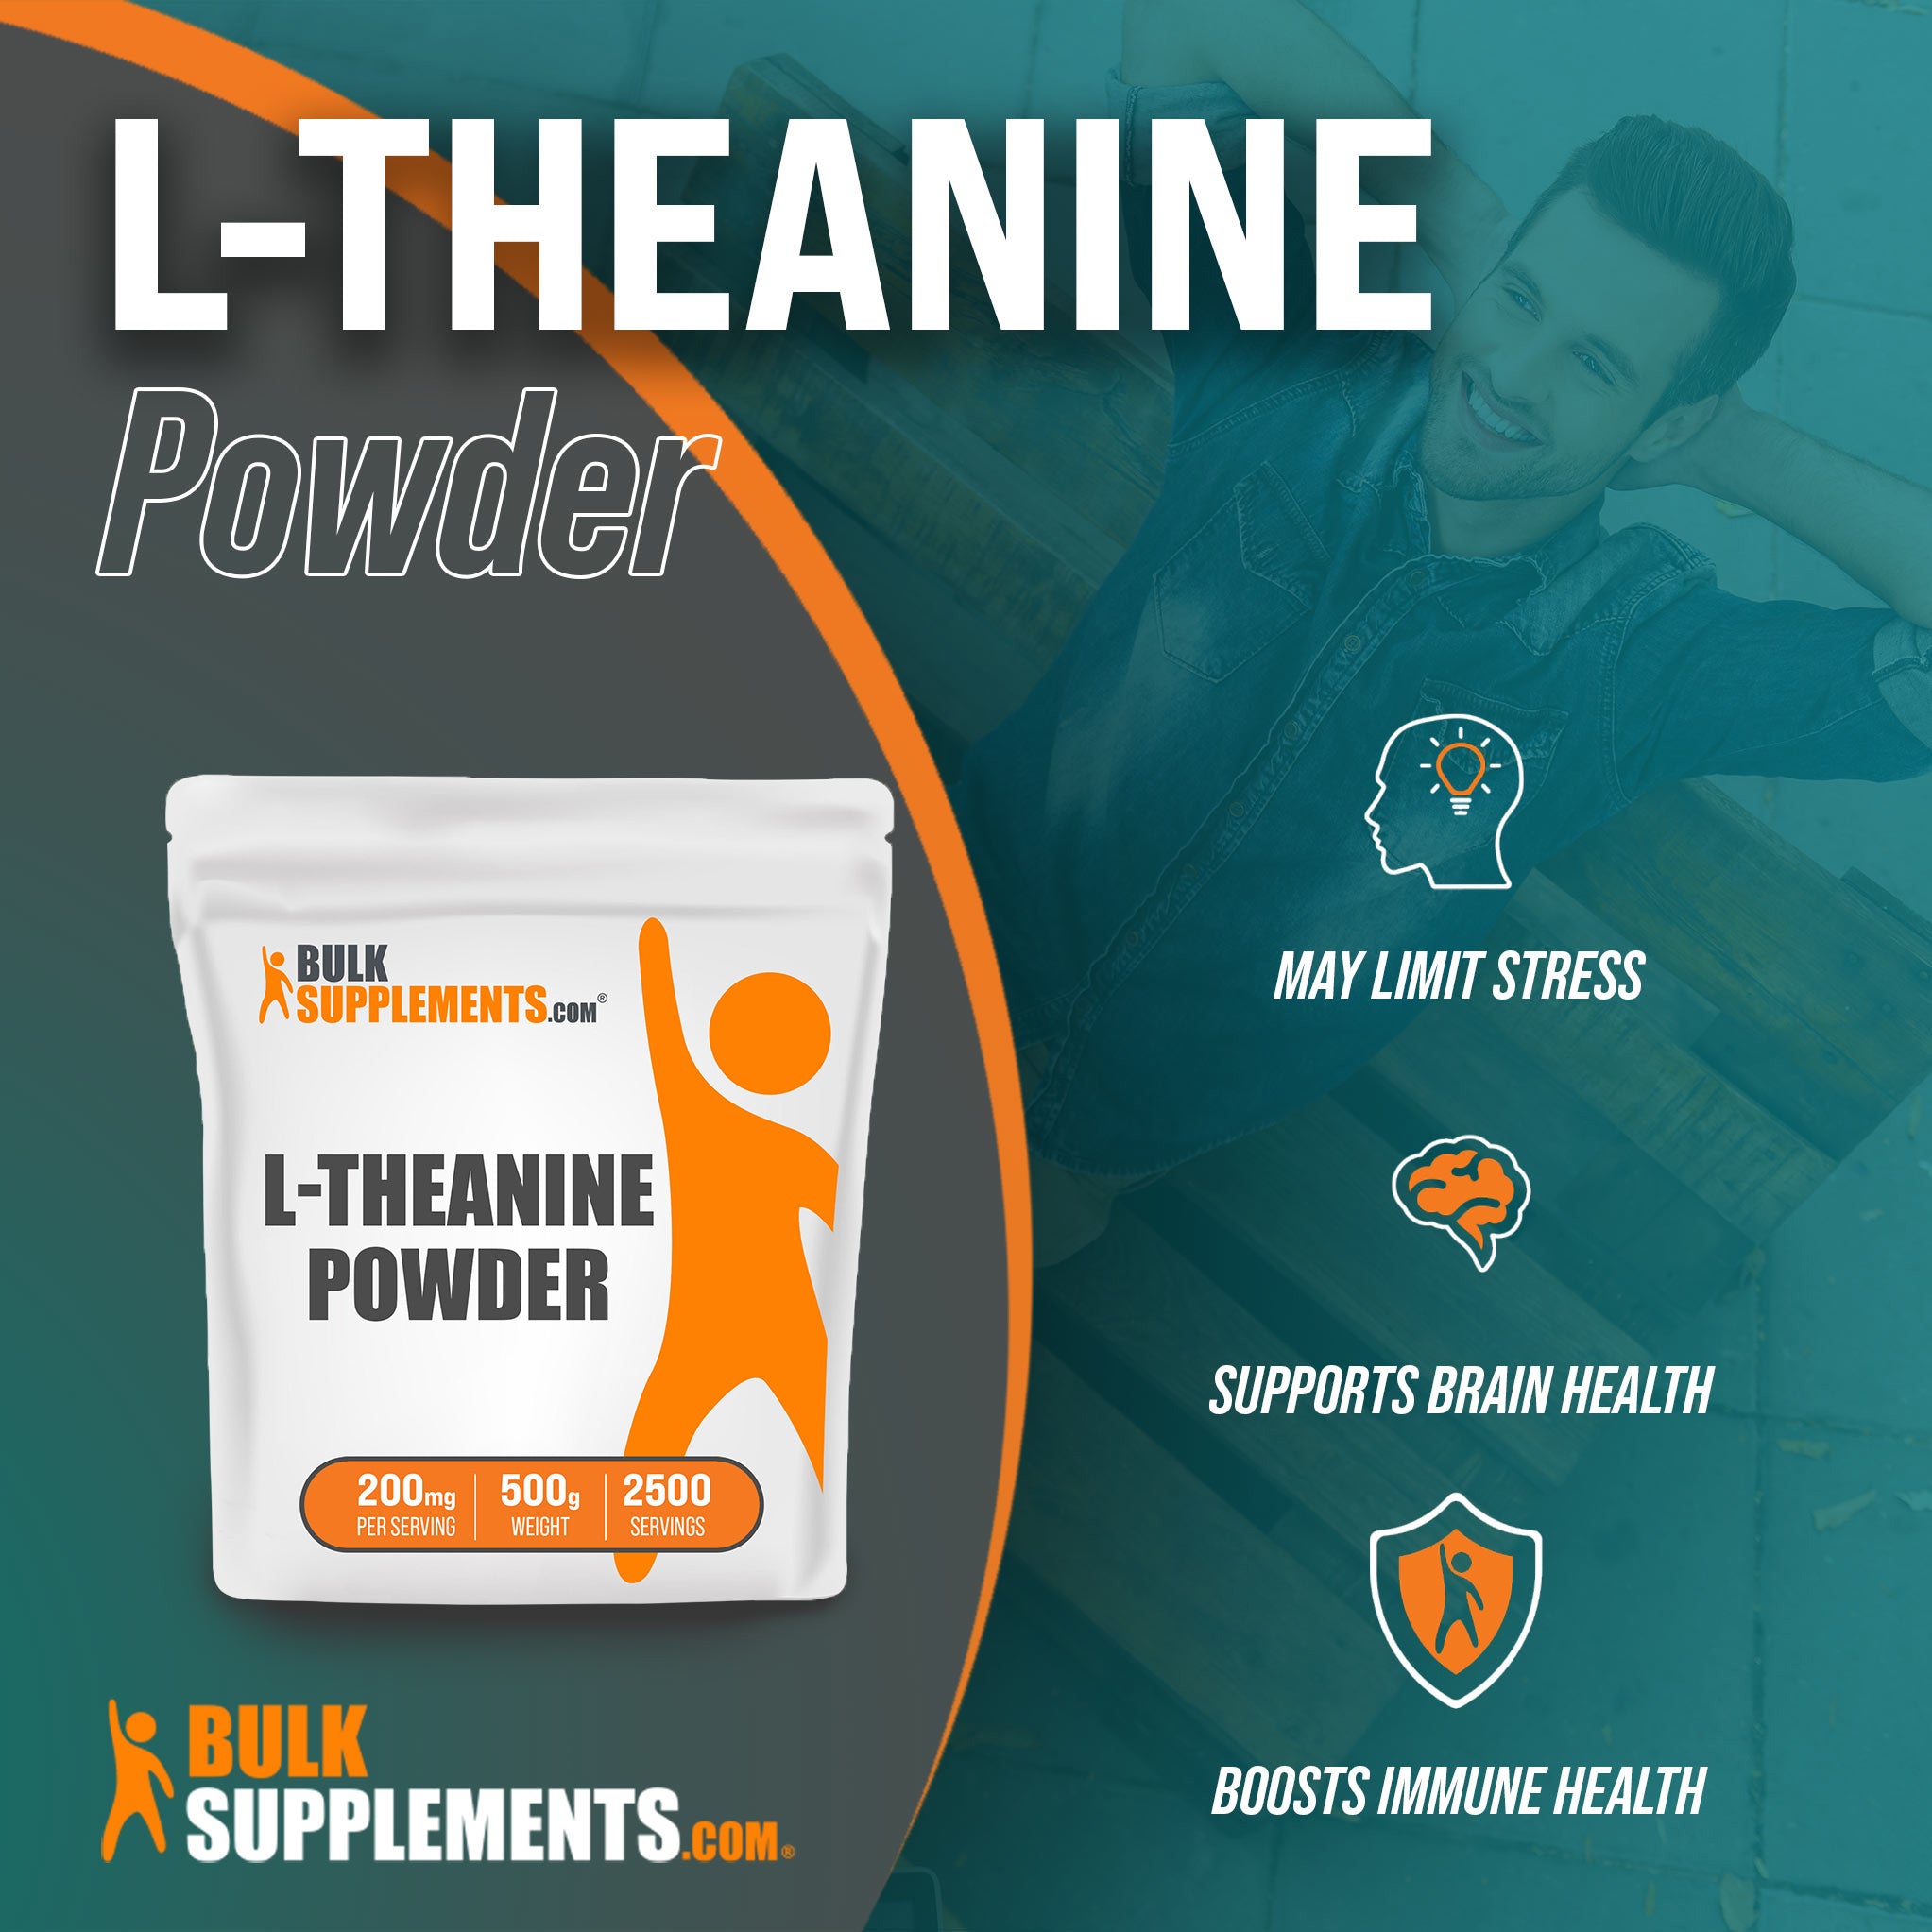 Benefits of L-Theanine: may limit stress, supports brain health, boosts immune health